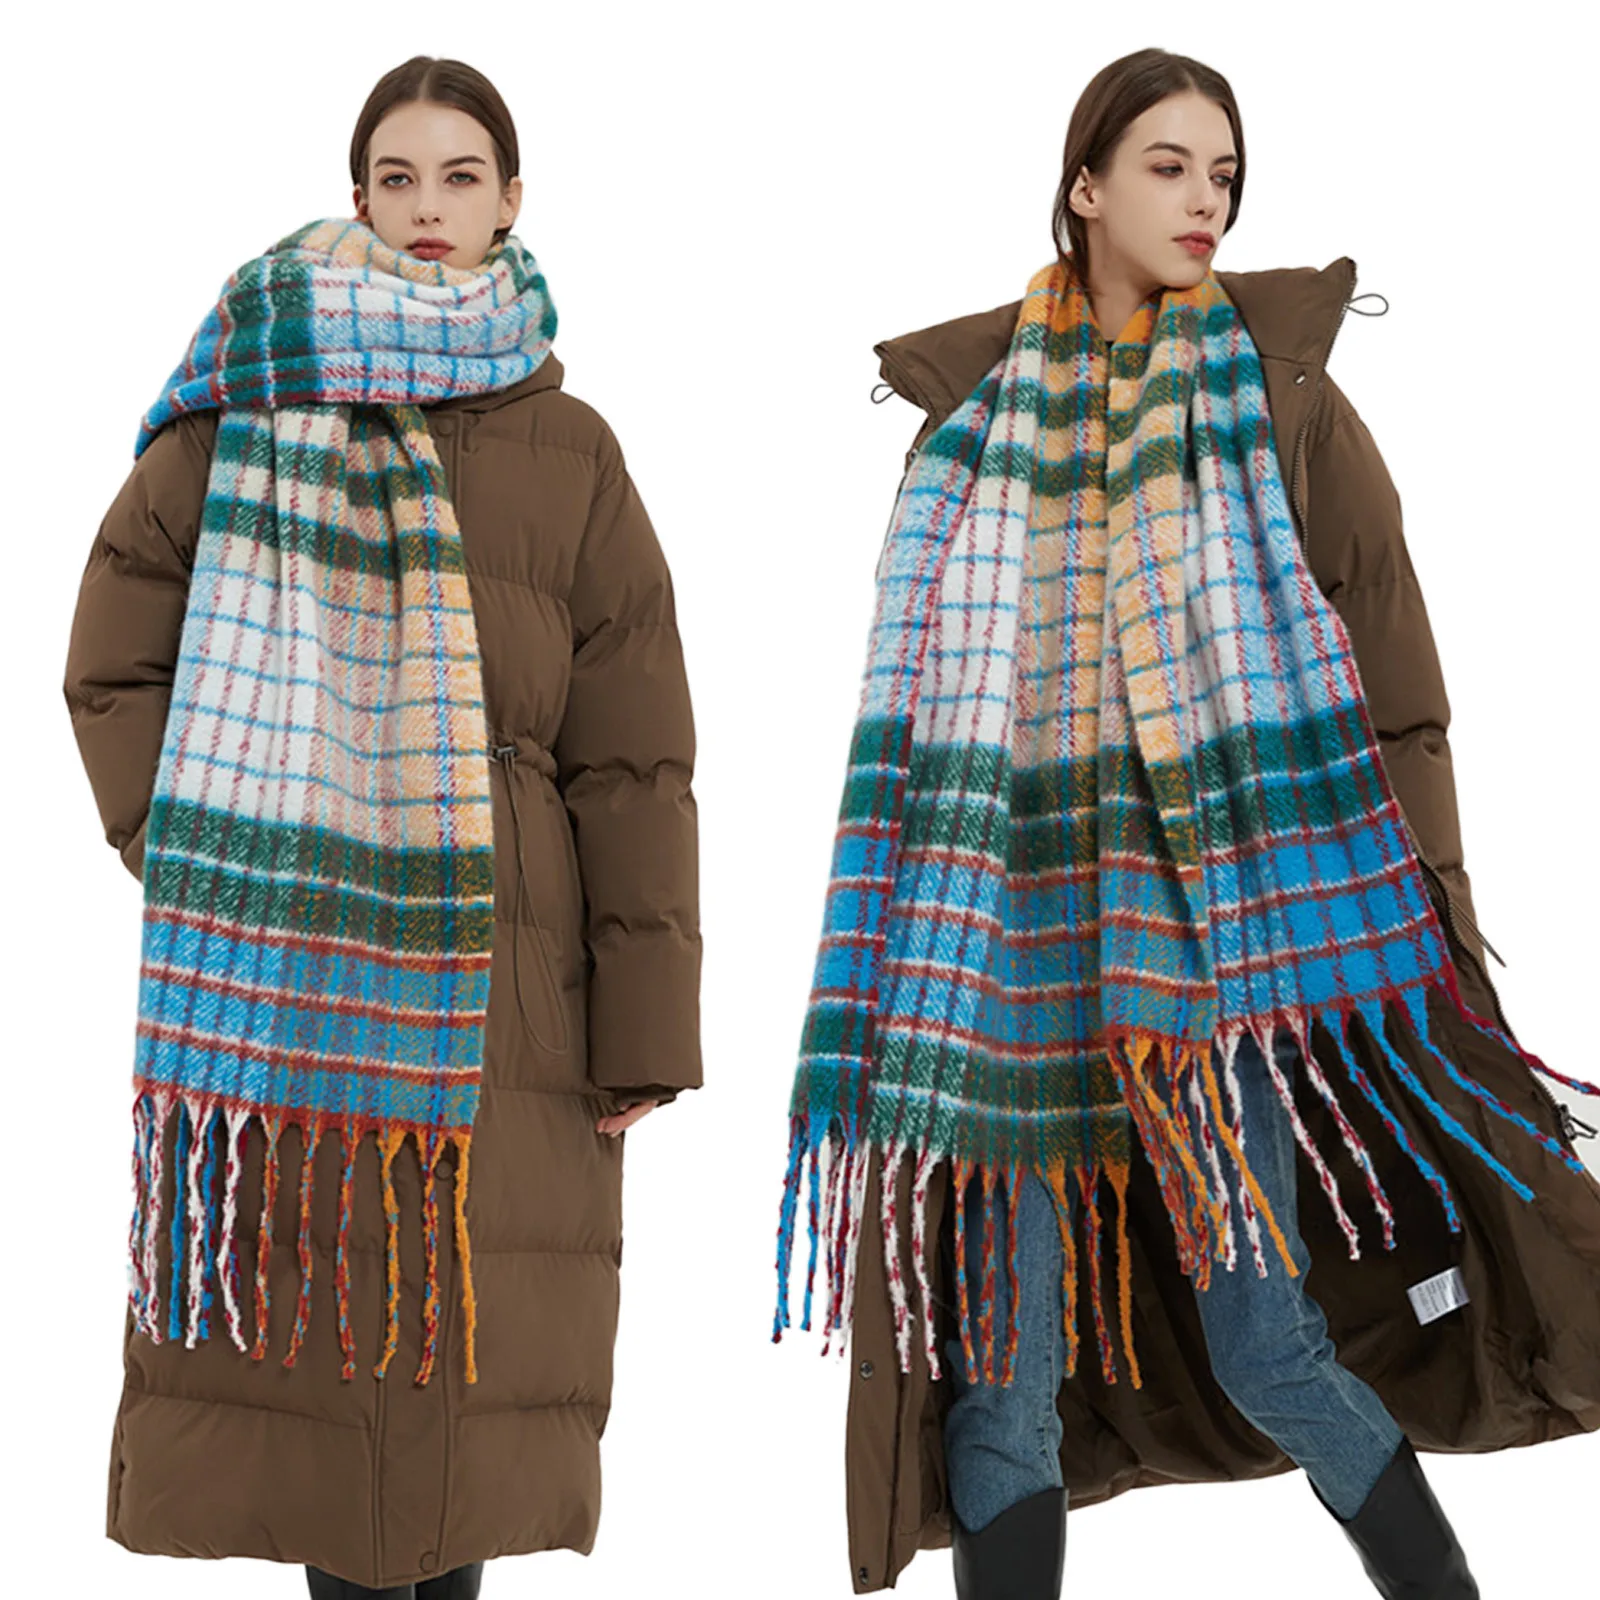 

2023 Winter Plaid Cashmere Scarf Fashion Shawl Colored Chequered Scarves Warm Students' Necks Thicker Shawl Long Tassel